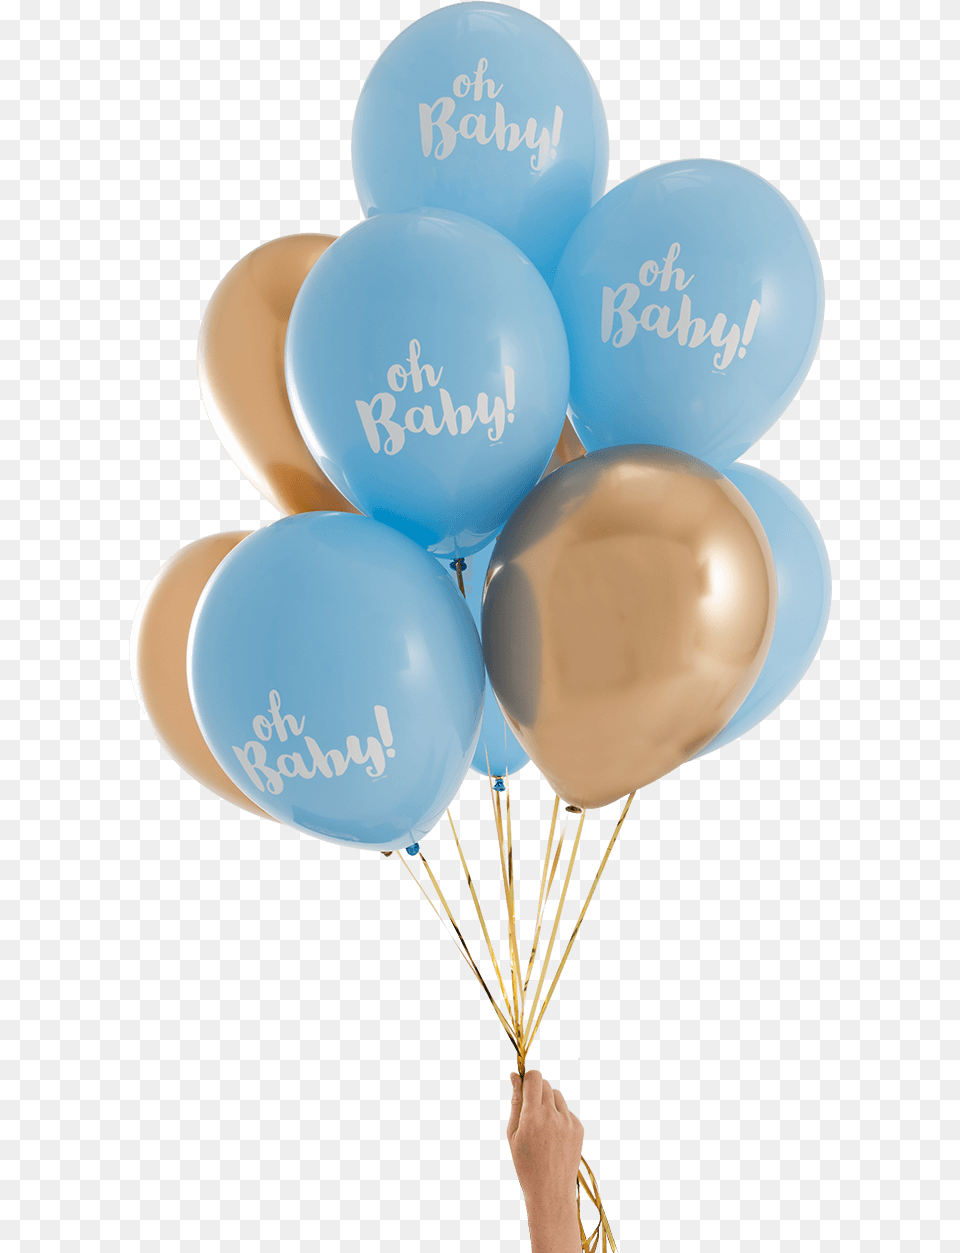 Oh Baby Blue Amp Gold Party Balloons Blue And Gold Balloons, Balloon Free Png Download